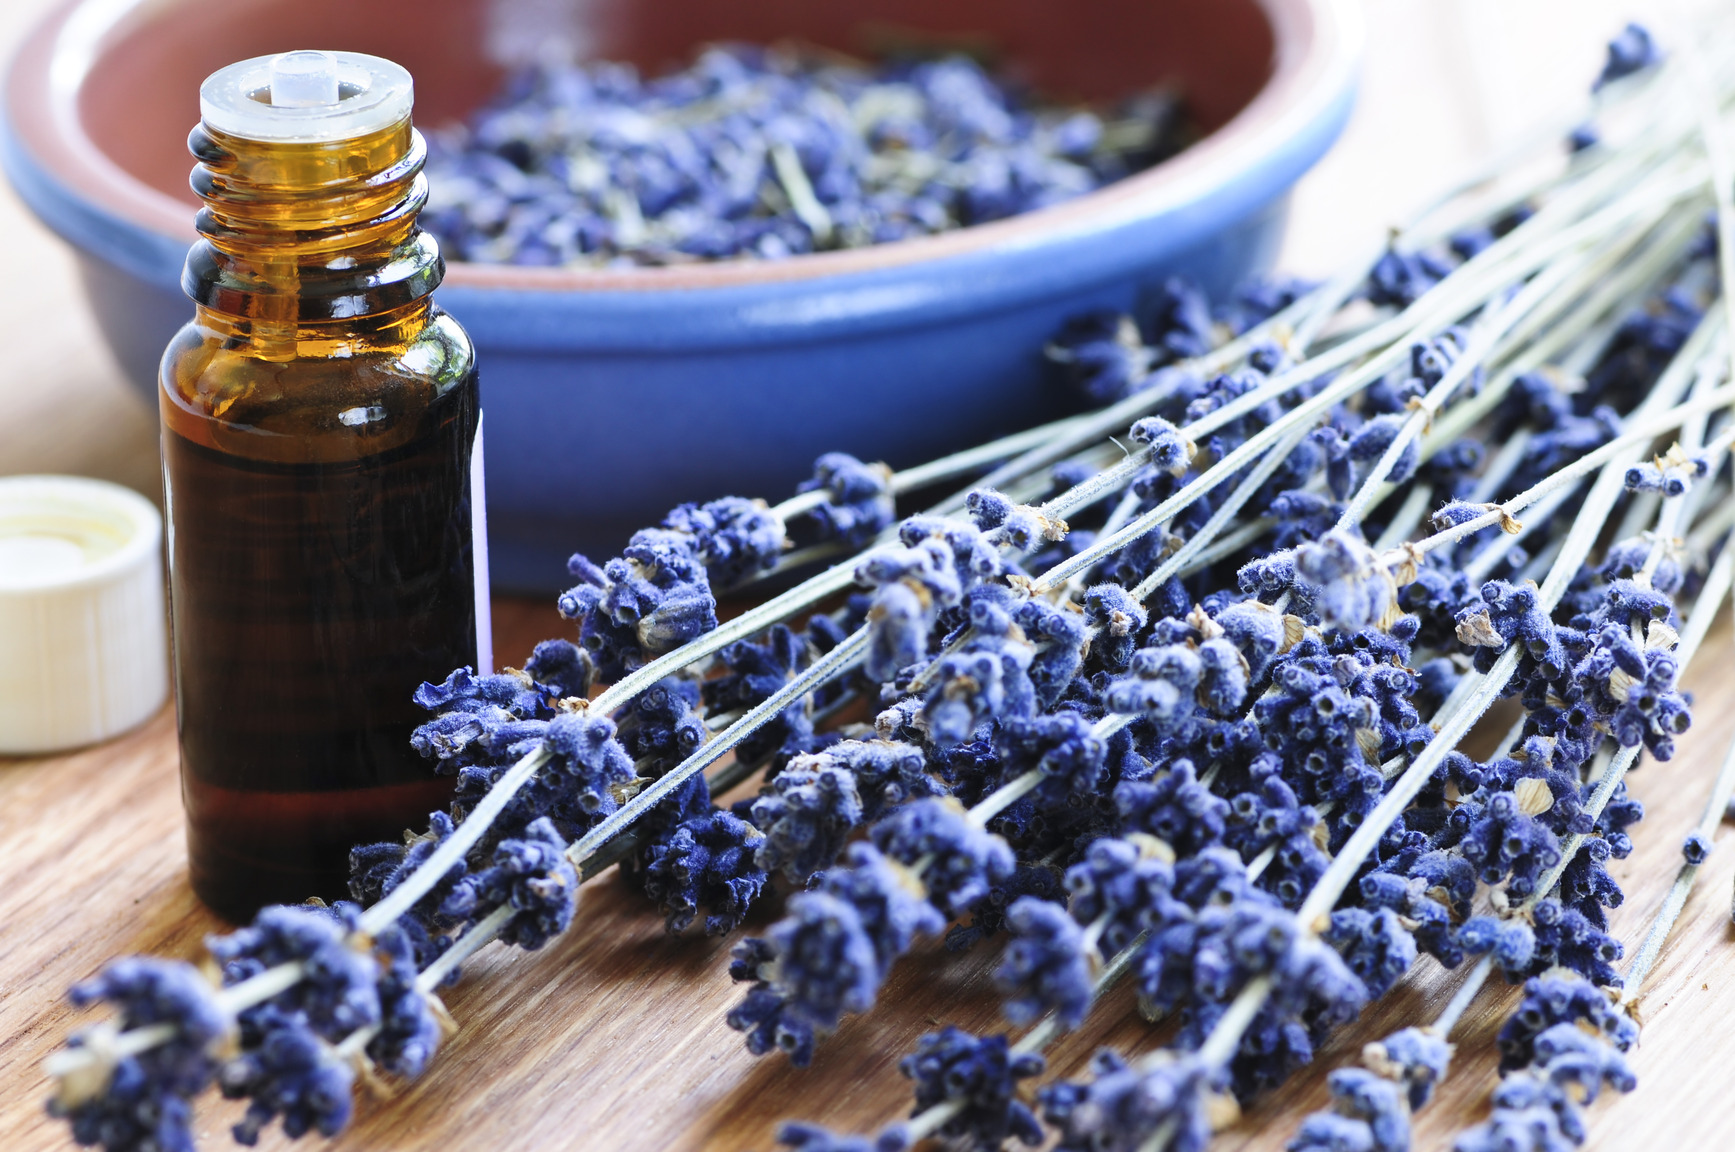 Help Your Hair Become Relaxed With These Three Beautiful Essential Oils